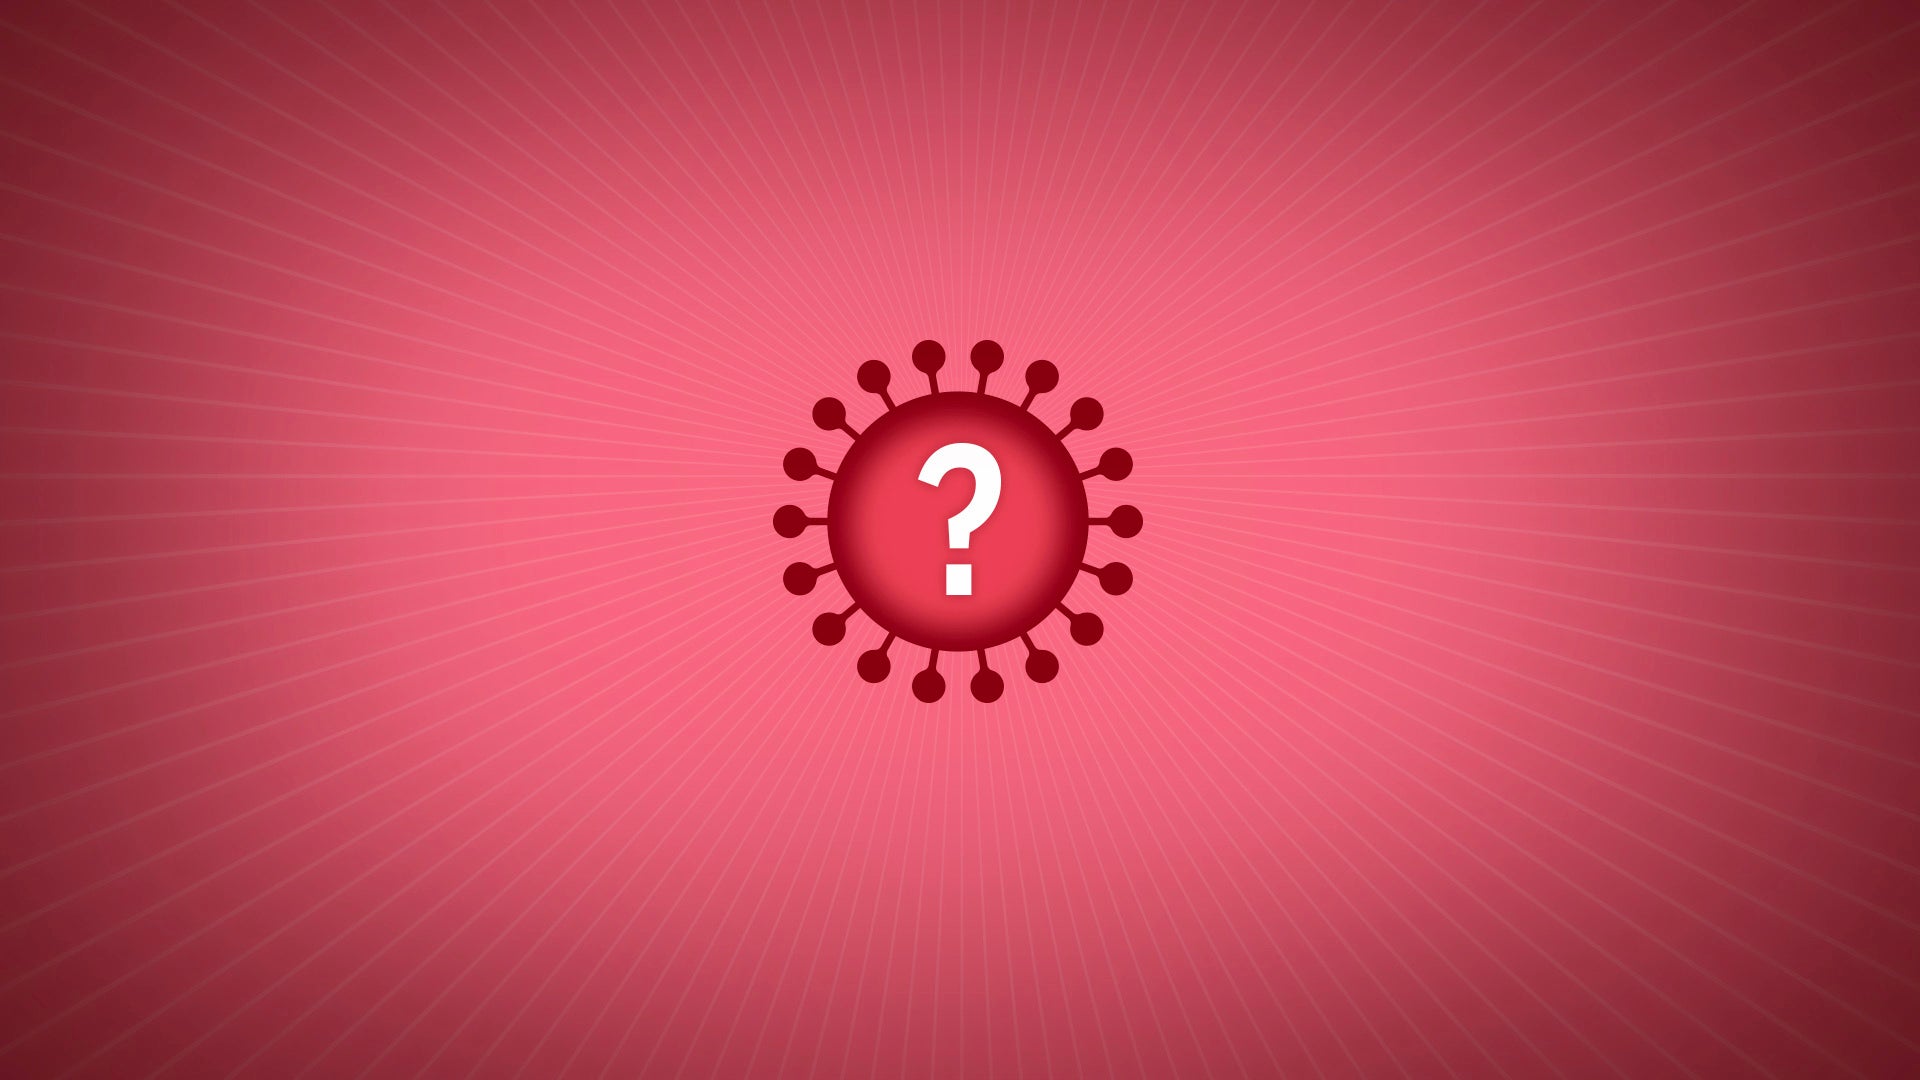 Virus Outbreak-Viral Questions-New Variant